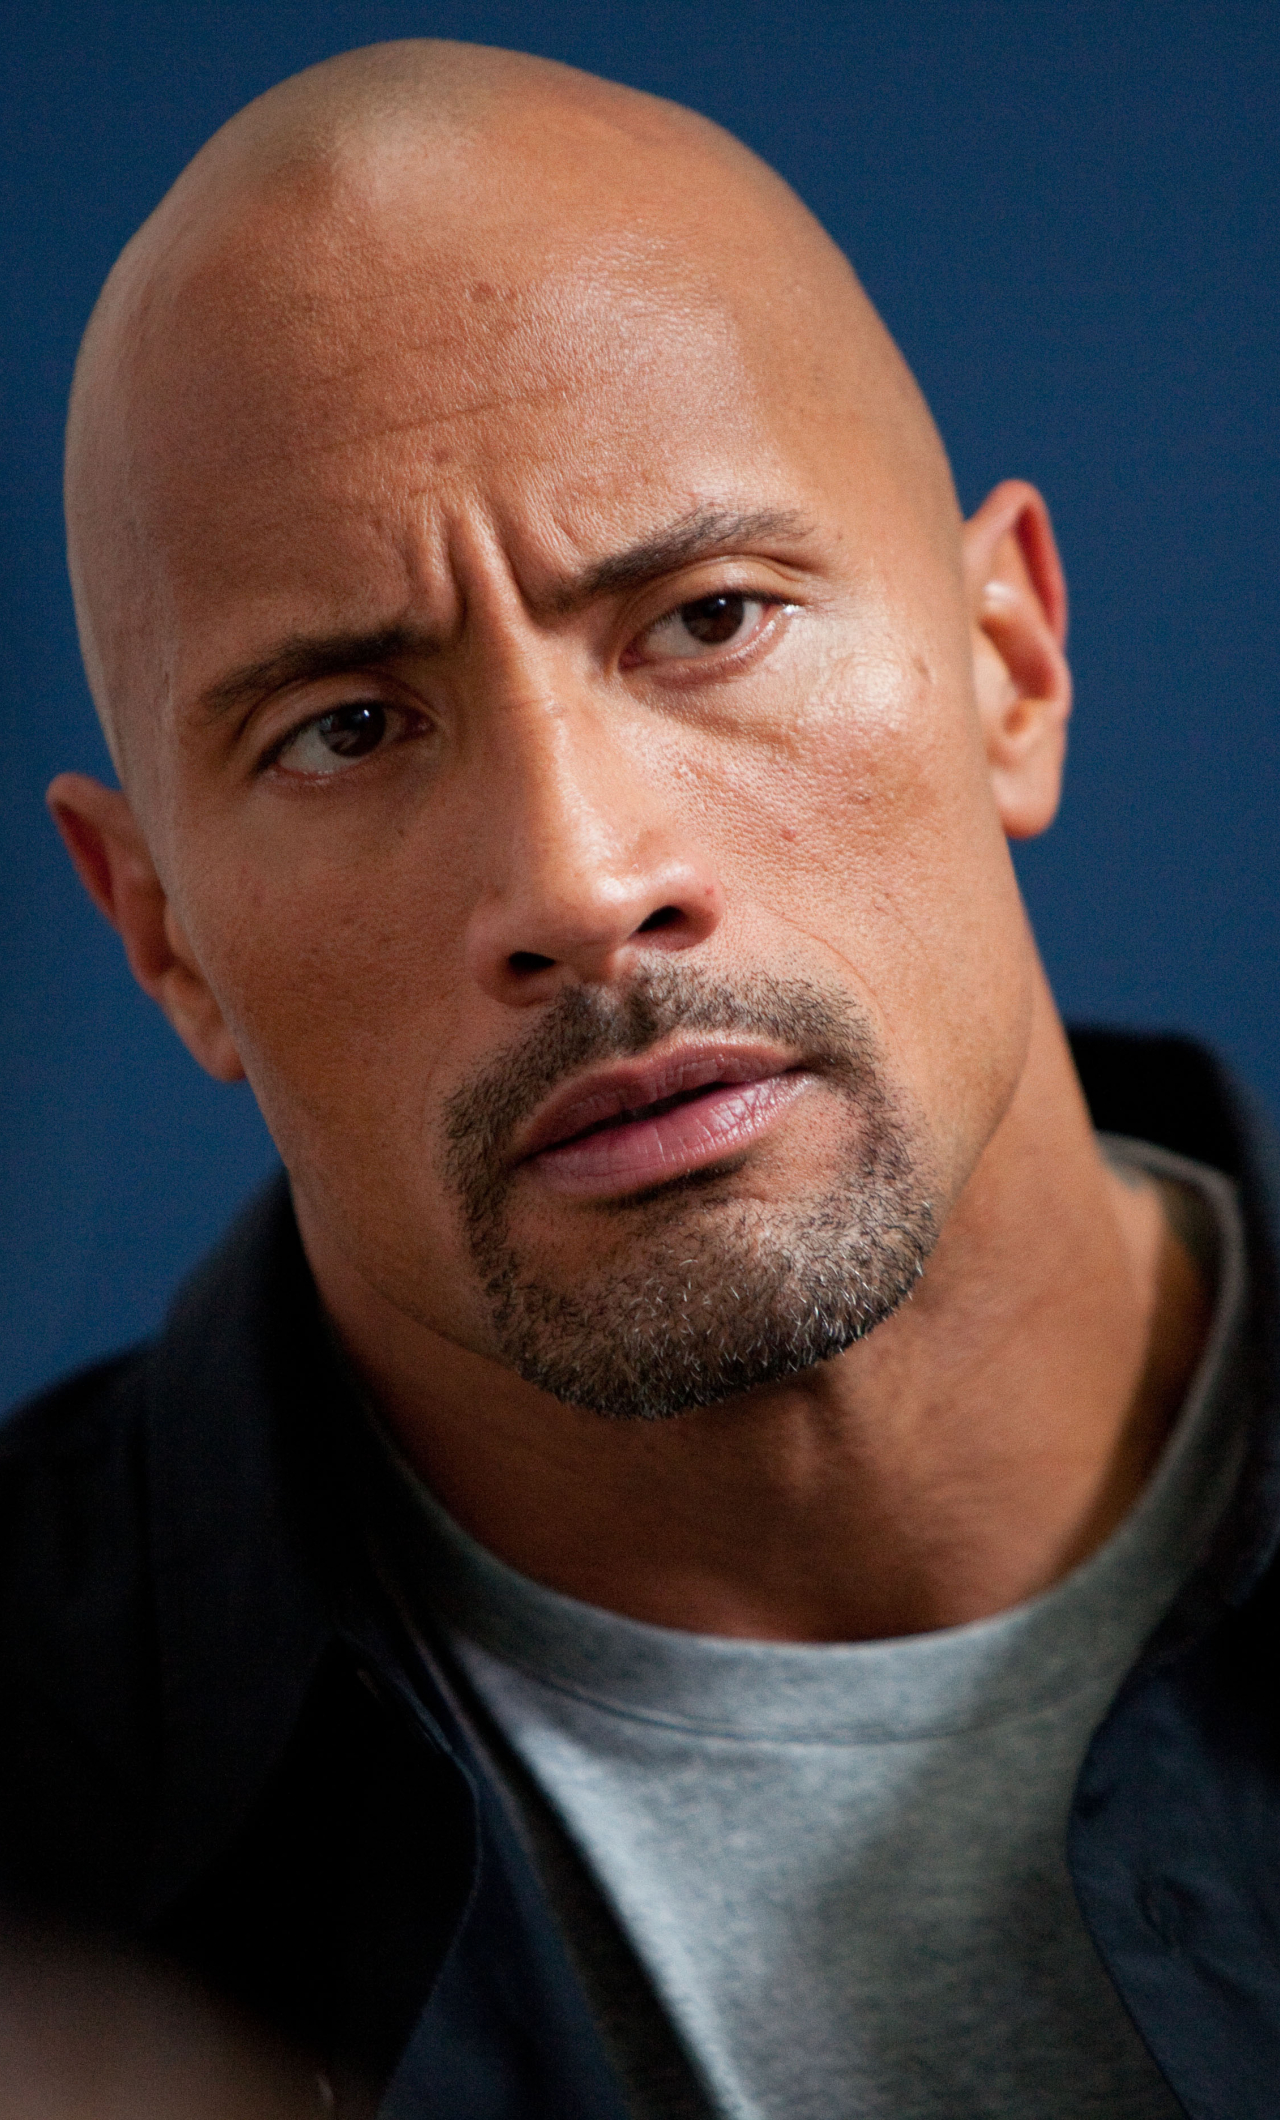 Locked up dwayne johnson in the role of black adam in a shazam movie severa...